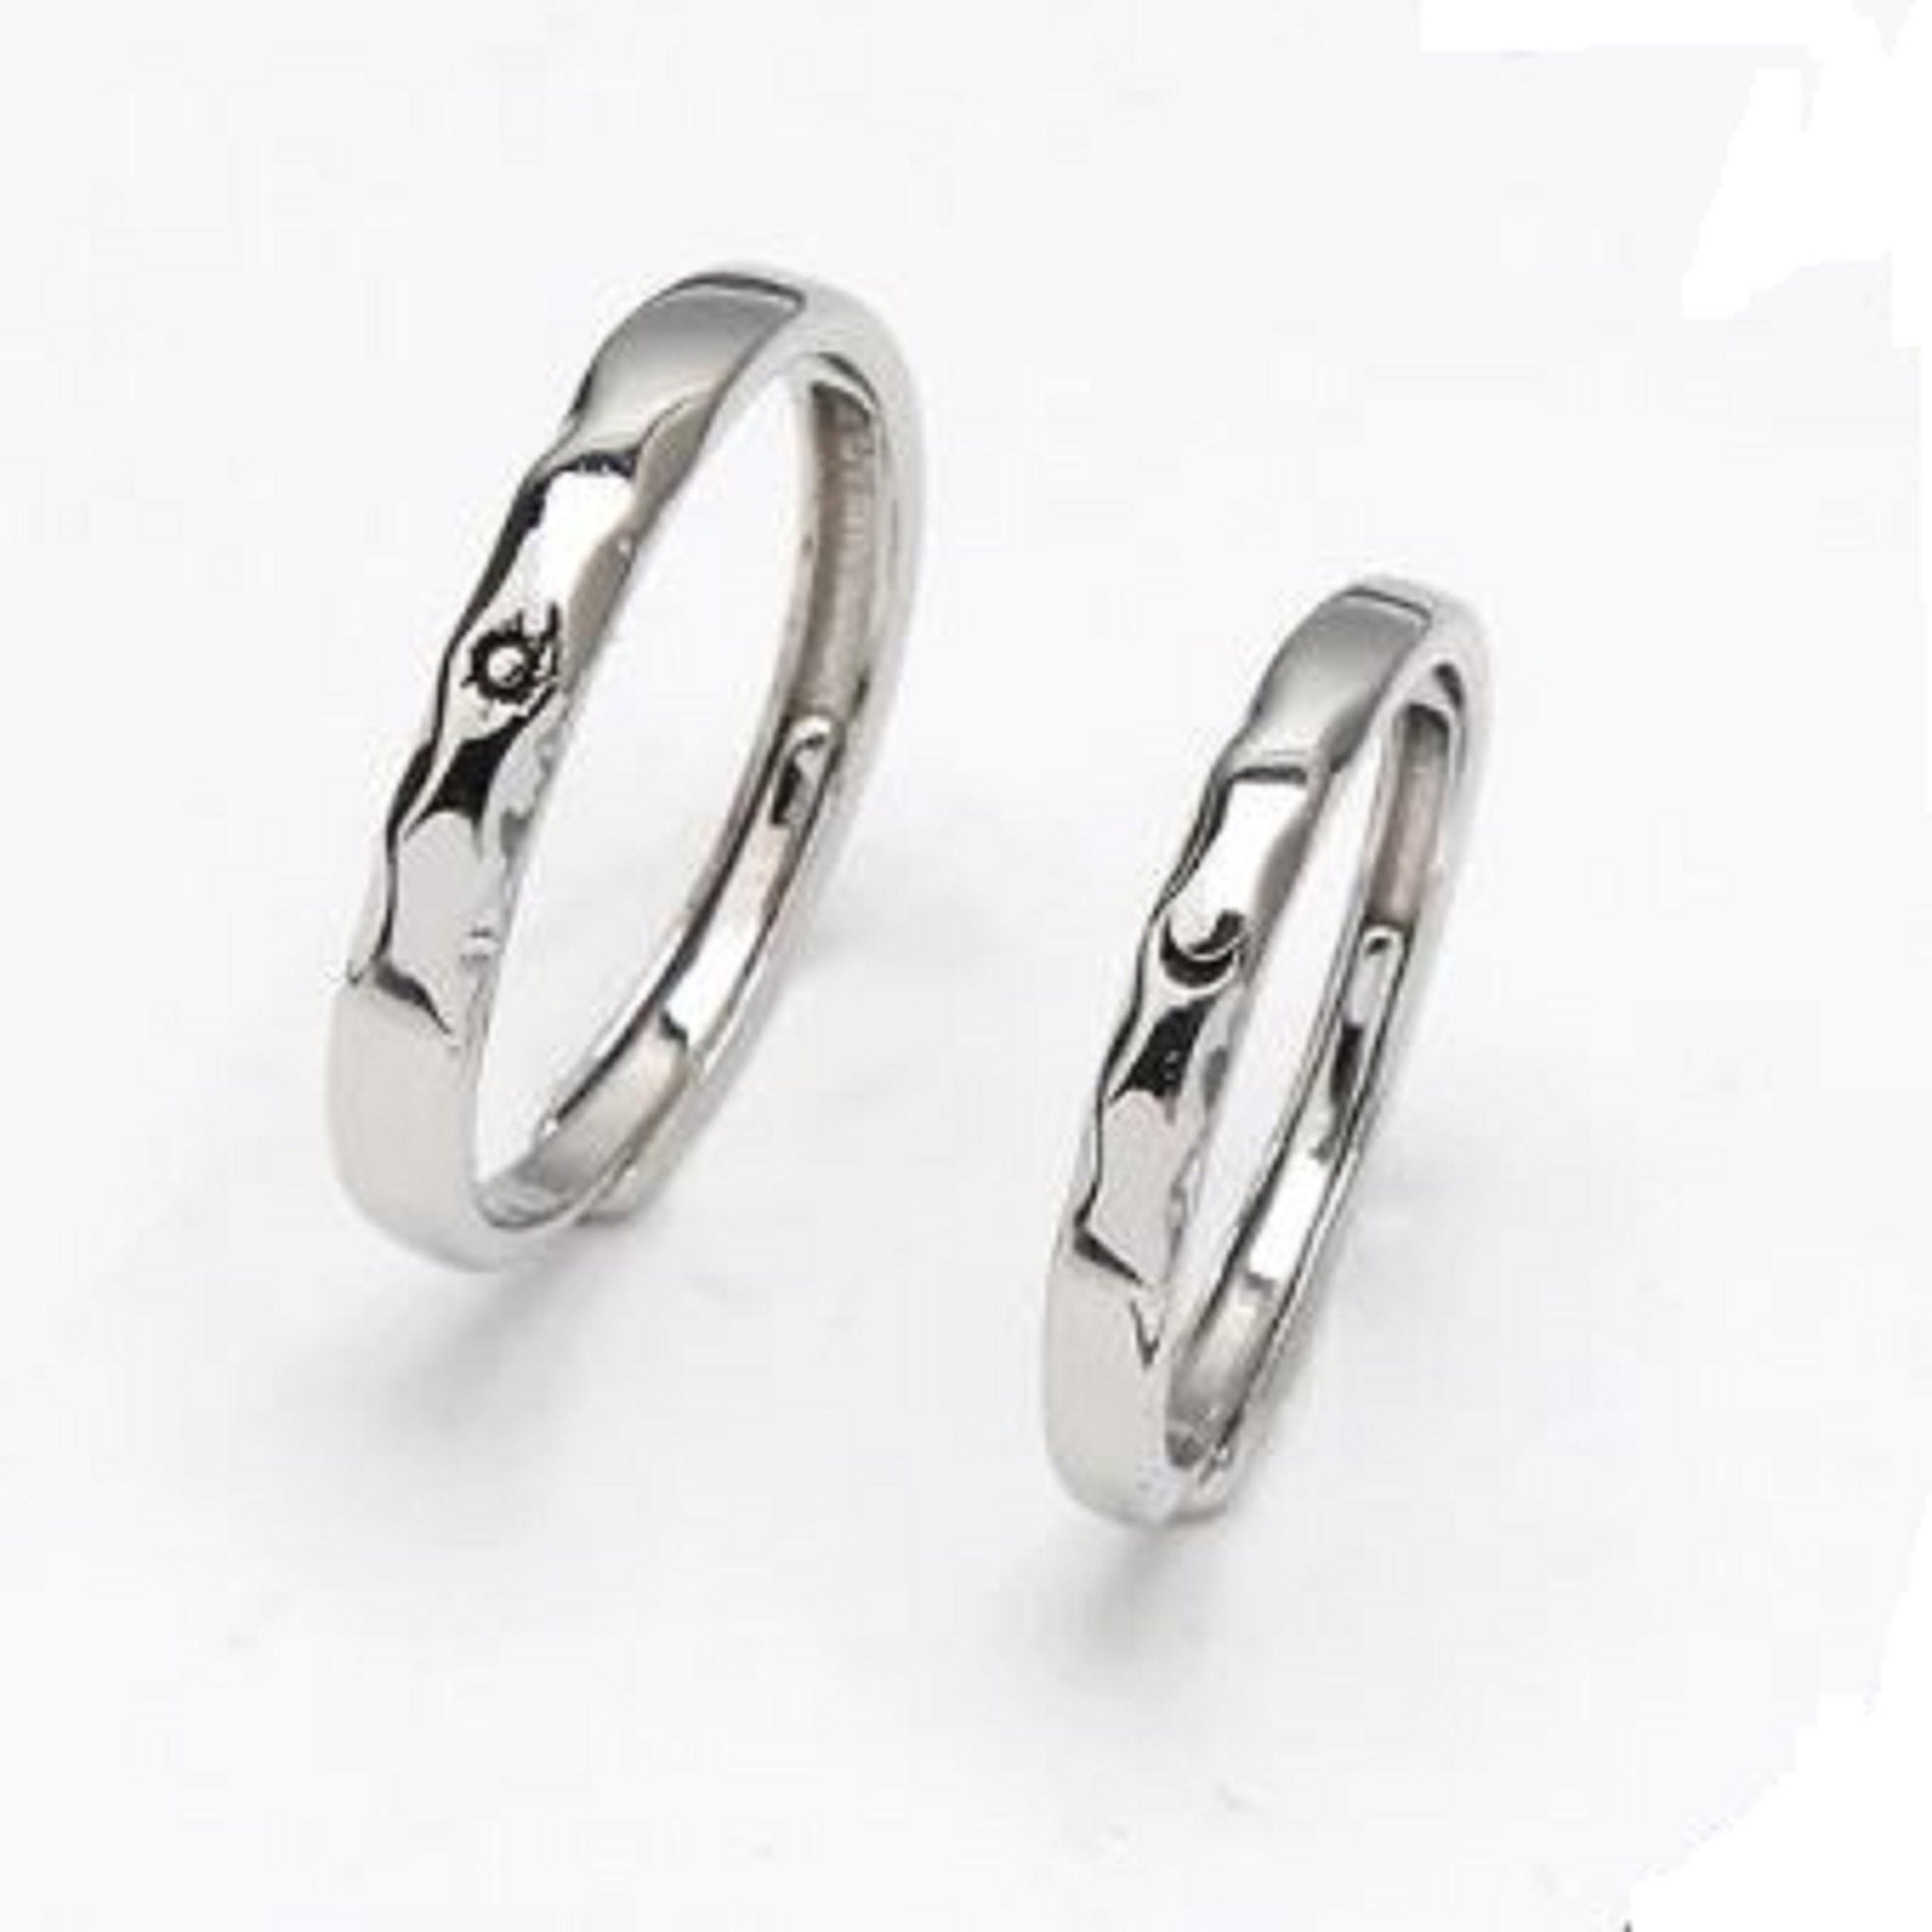 Sun Moon Adjustable Ring Silver Color Couples Ring Set For Men and Women - Friendship, Promise, Engagement